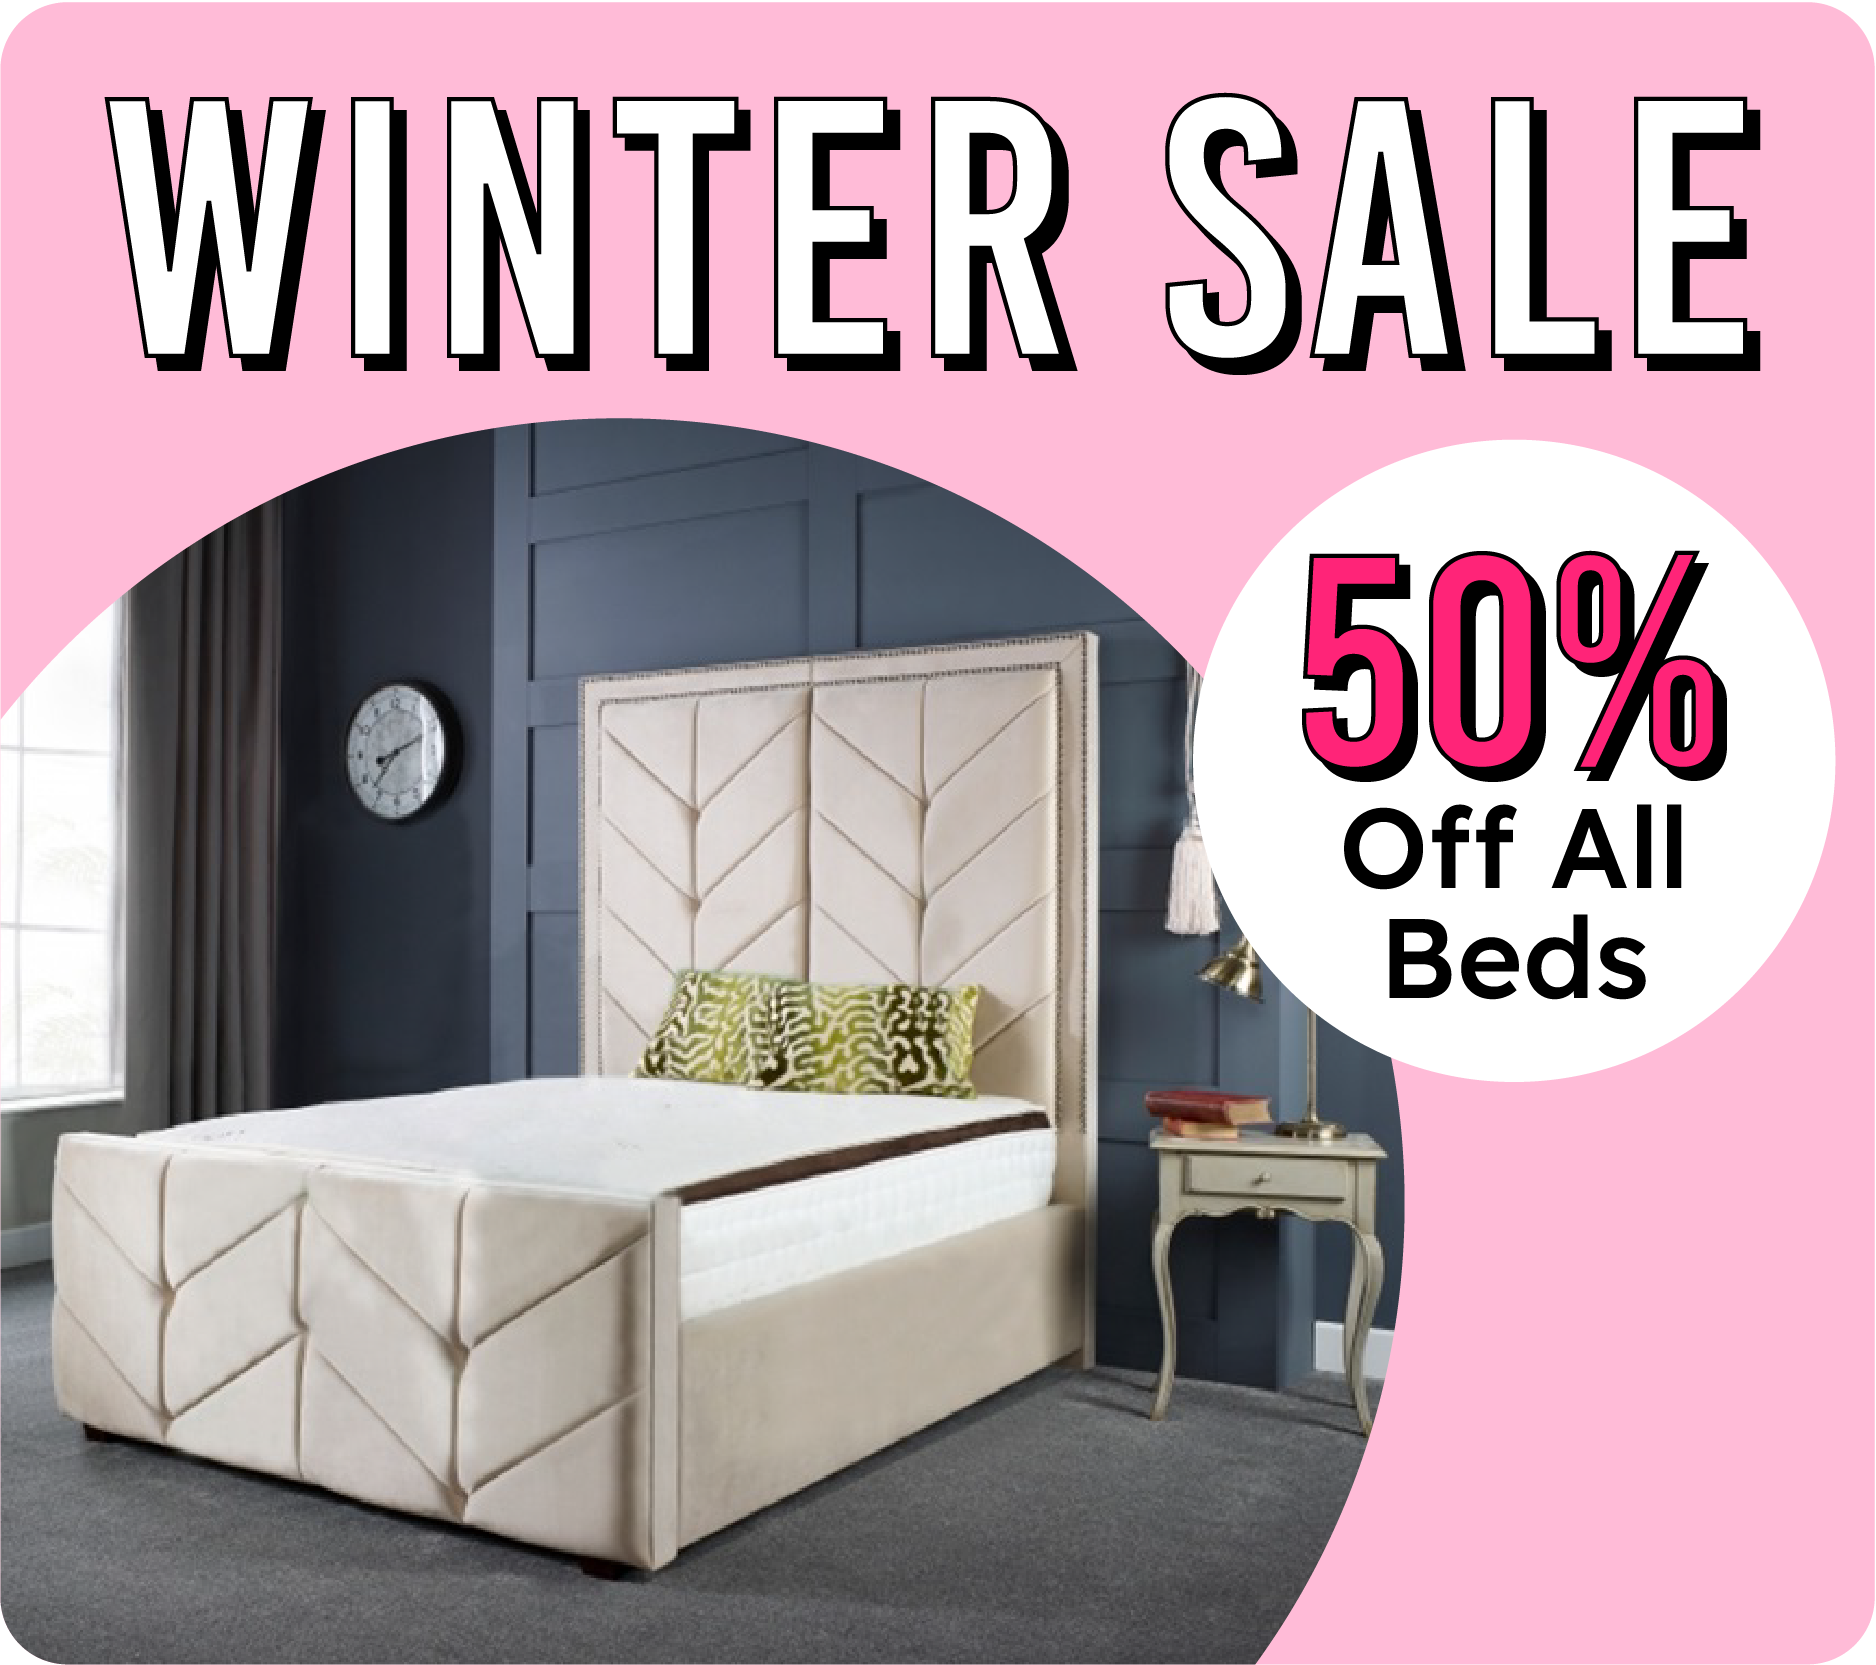 All Beds On Sale Now